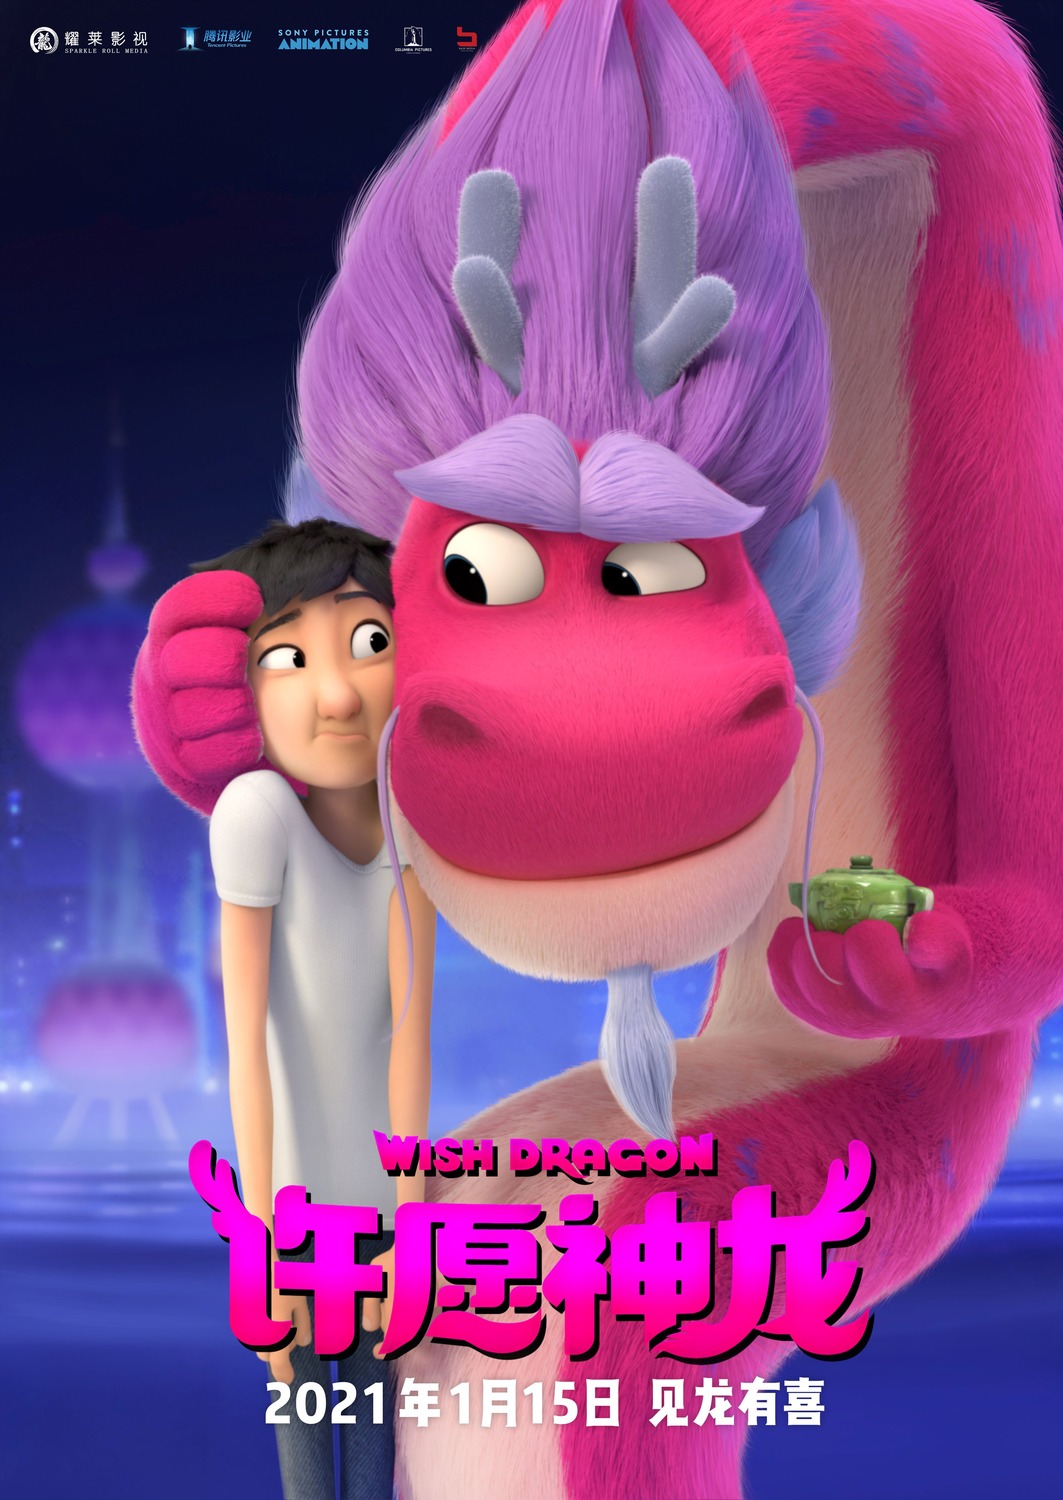 Extra Large Movie Poster Image for Wish Dragon (#3 of 4)